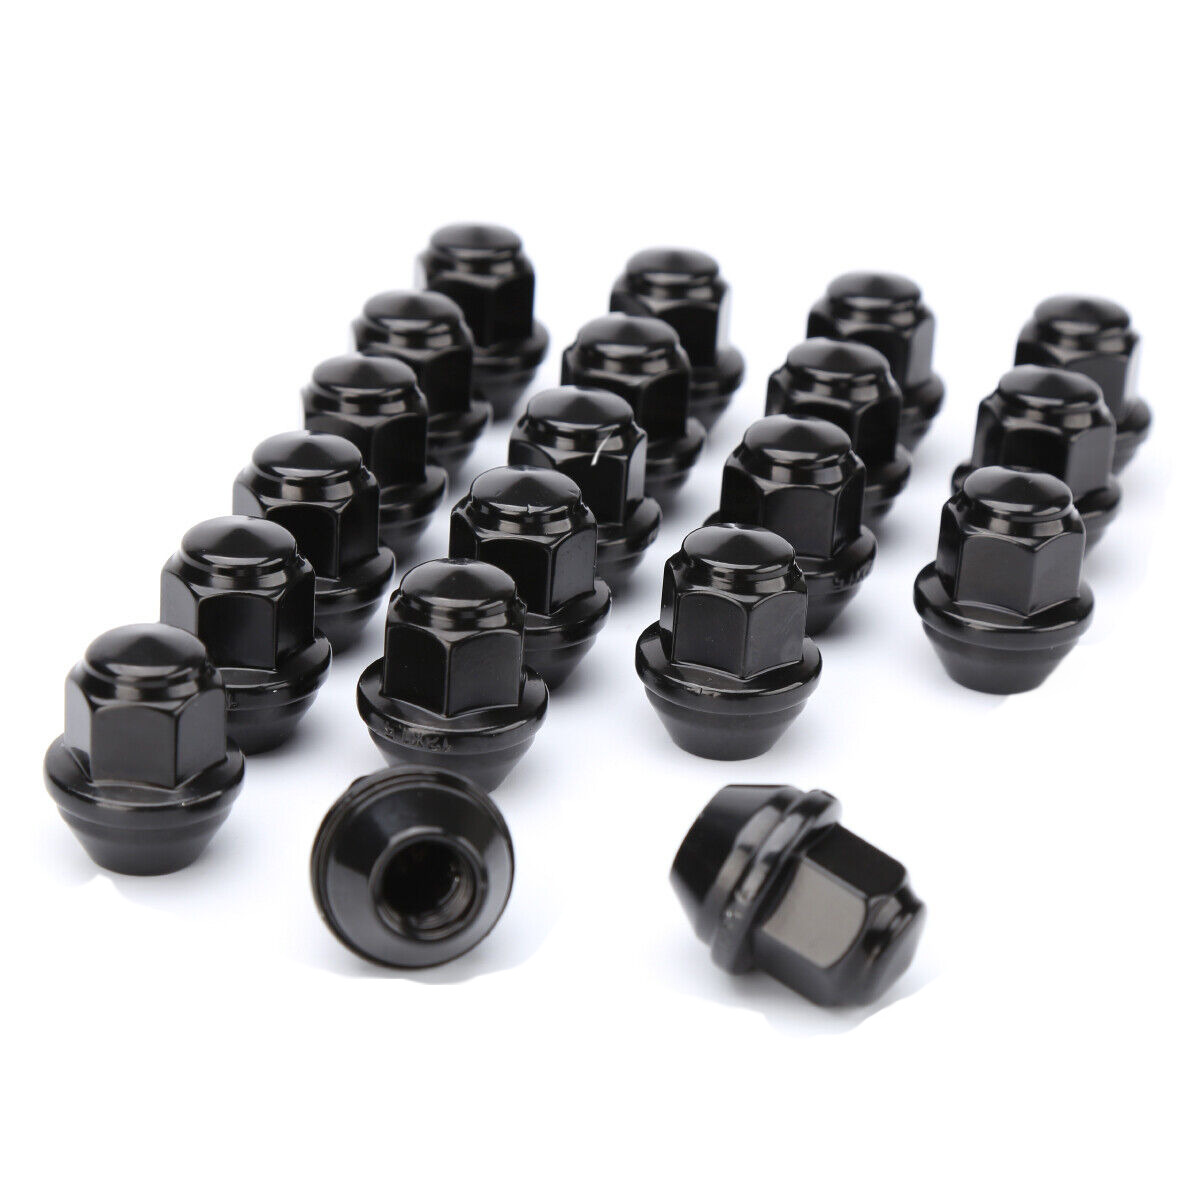 20PCS 12x1.5 Black OEM Factory Lug Nuts 19mm Hex FOR Ford Fusion Focus Lincoln